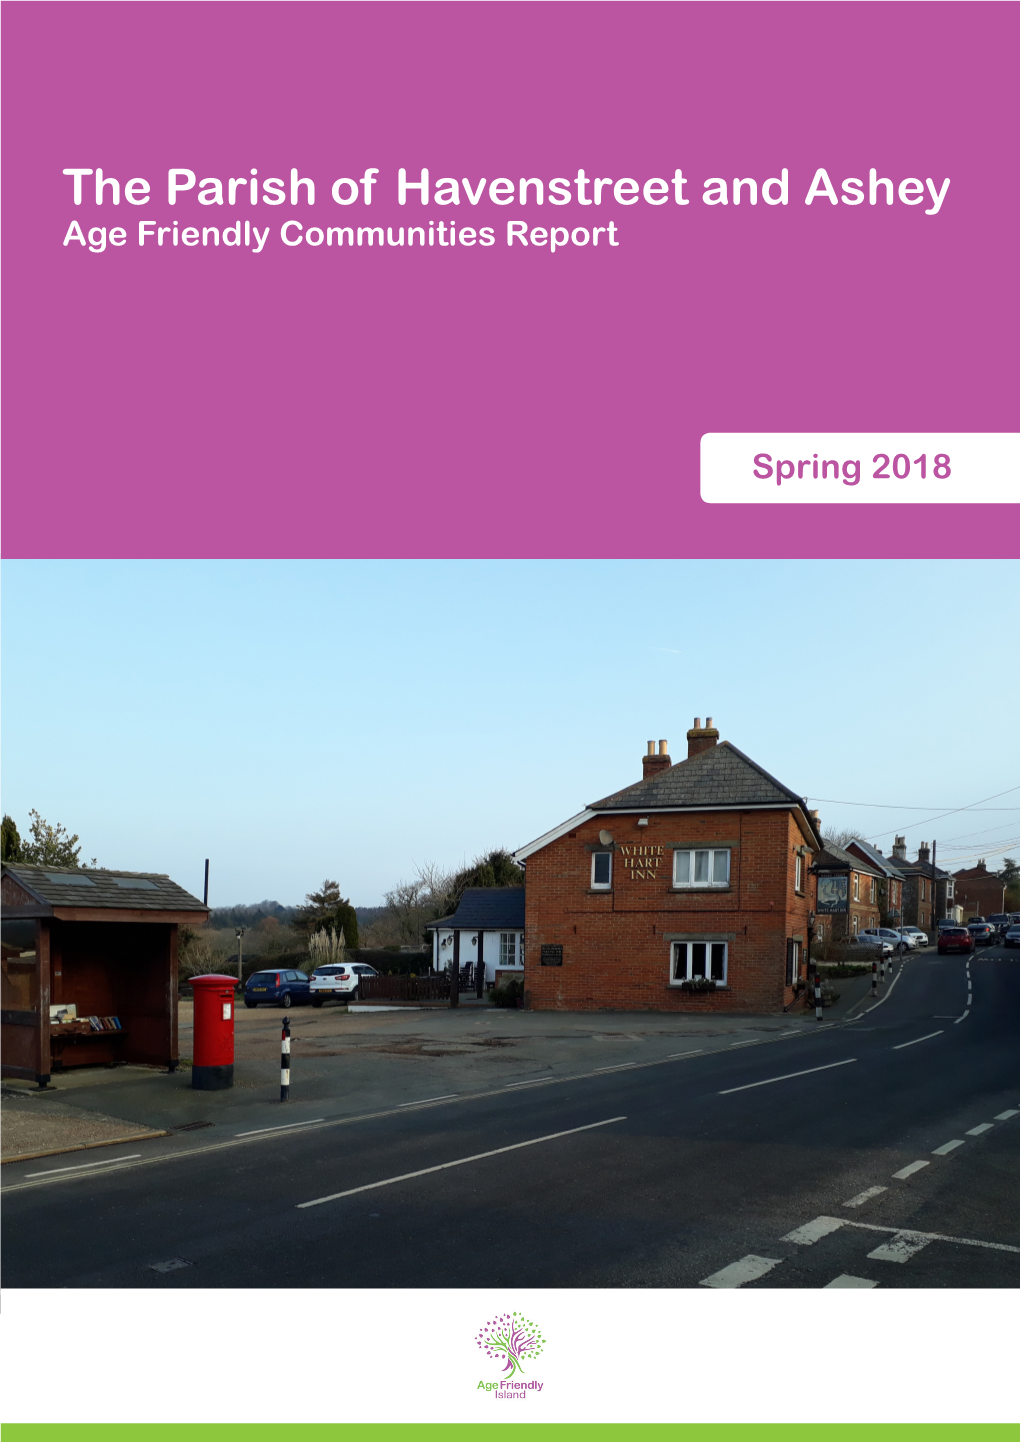 The Parish of Havenstreet and Ashey Age Friendly Communities Report